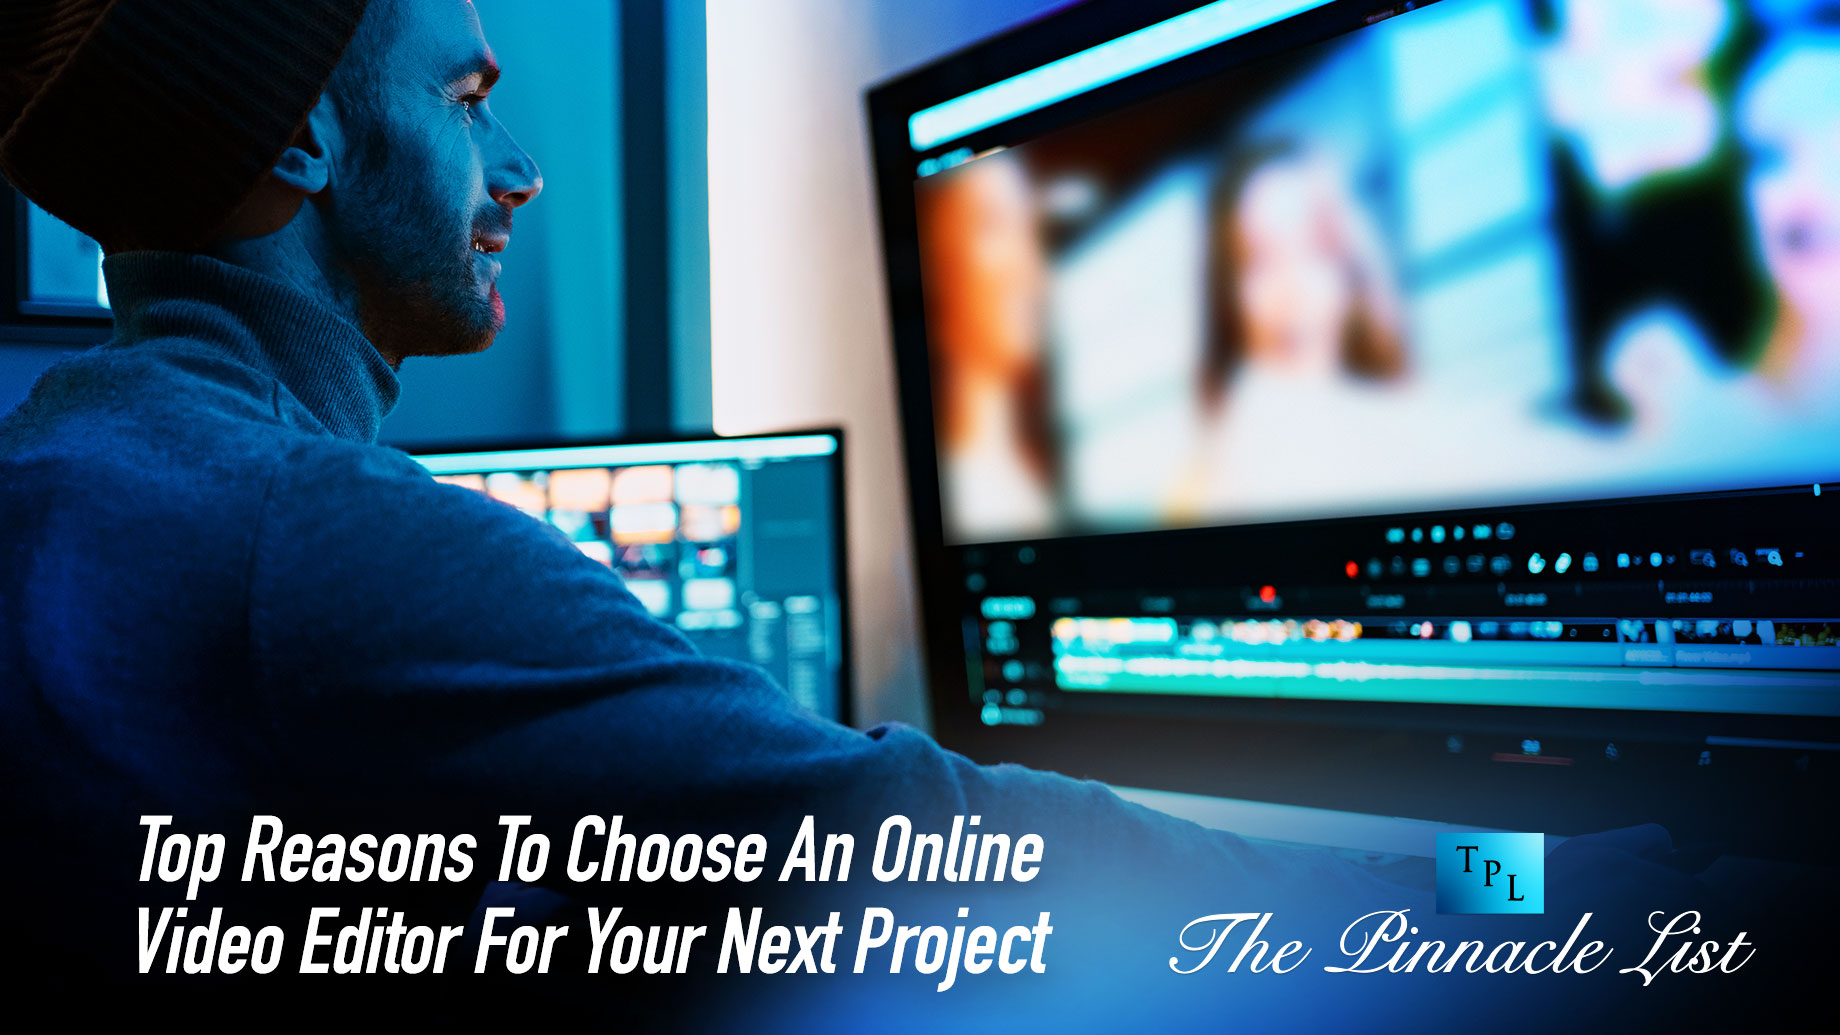 Top Reasons To Choose An Online Video Editor For Your Next Project